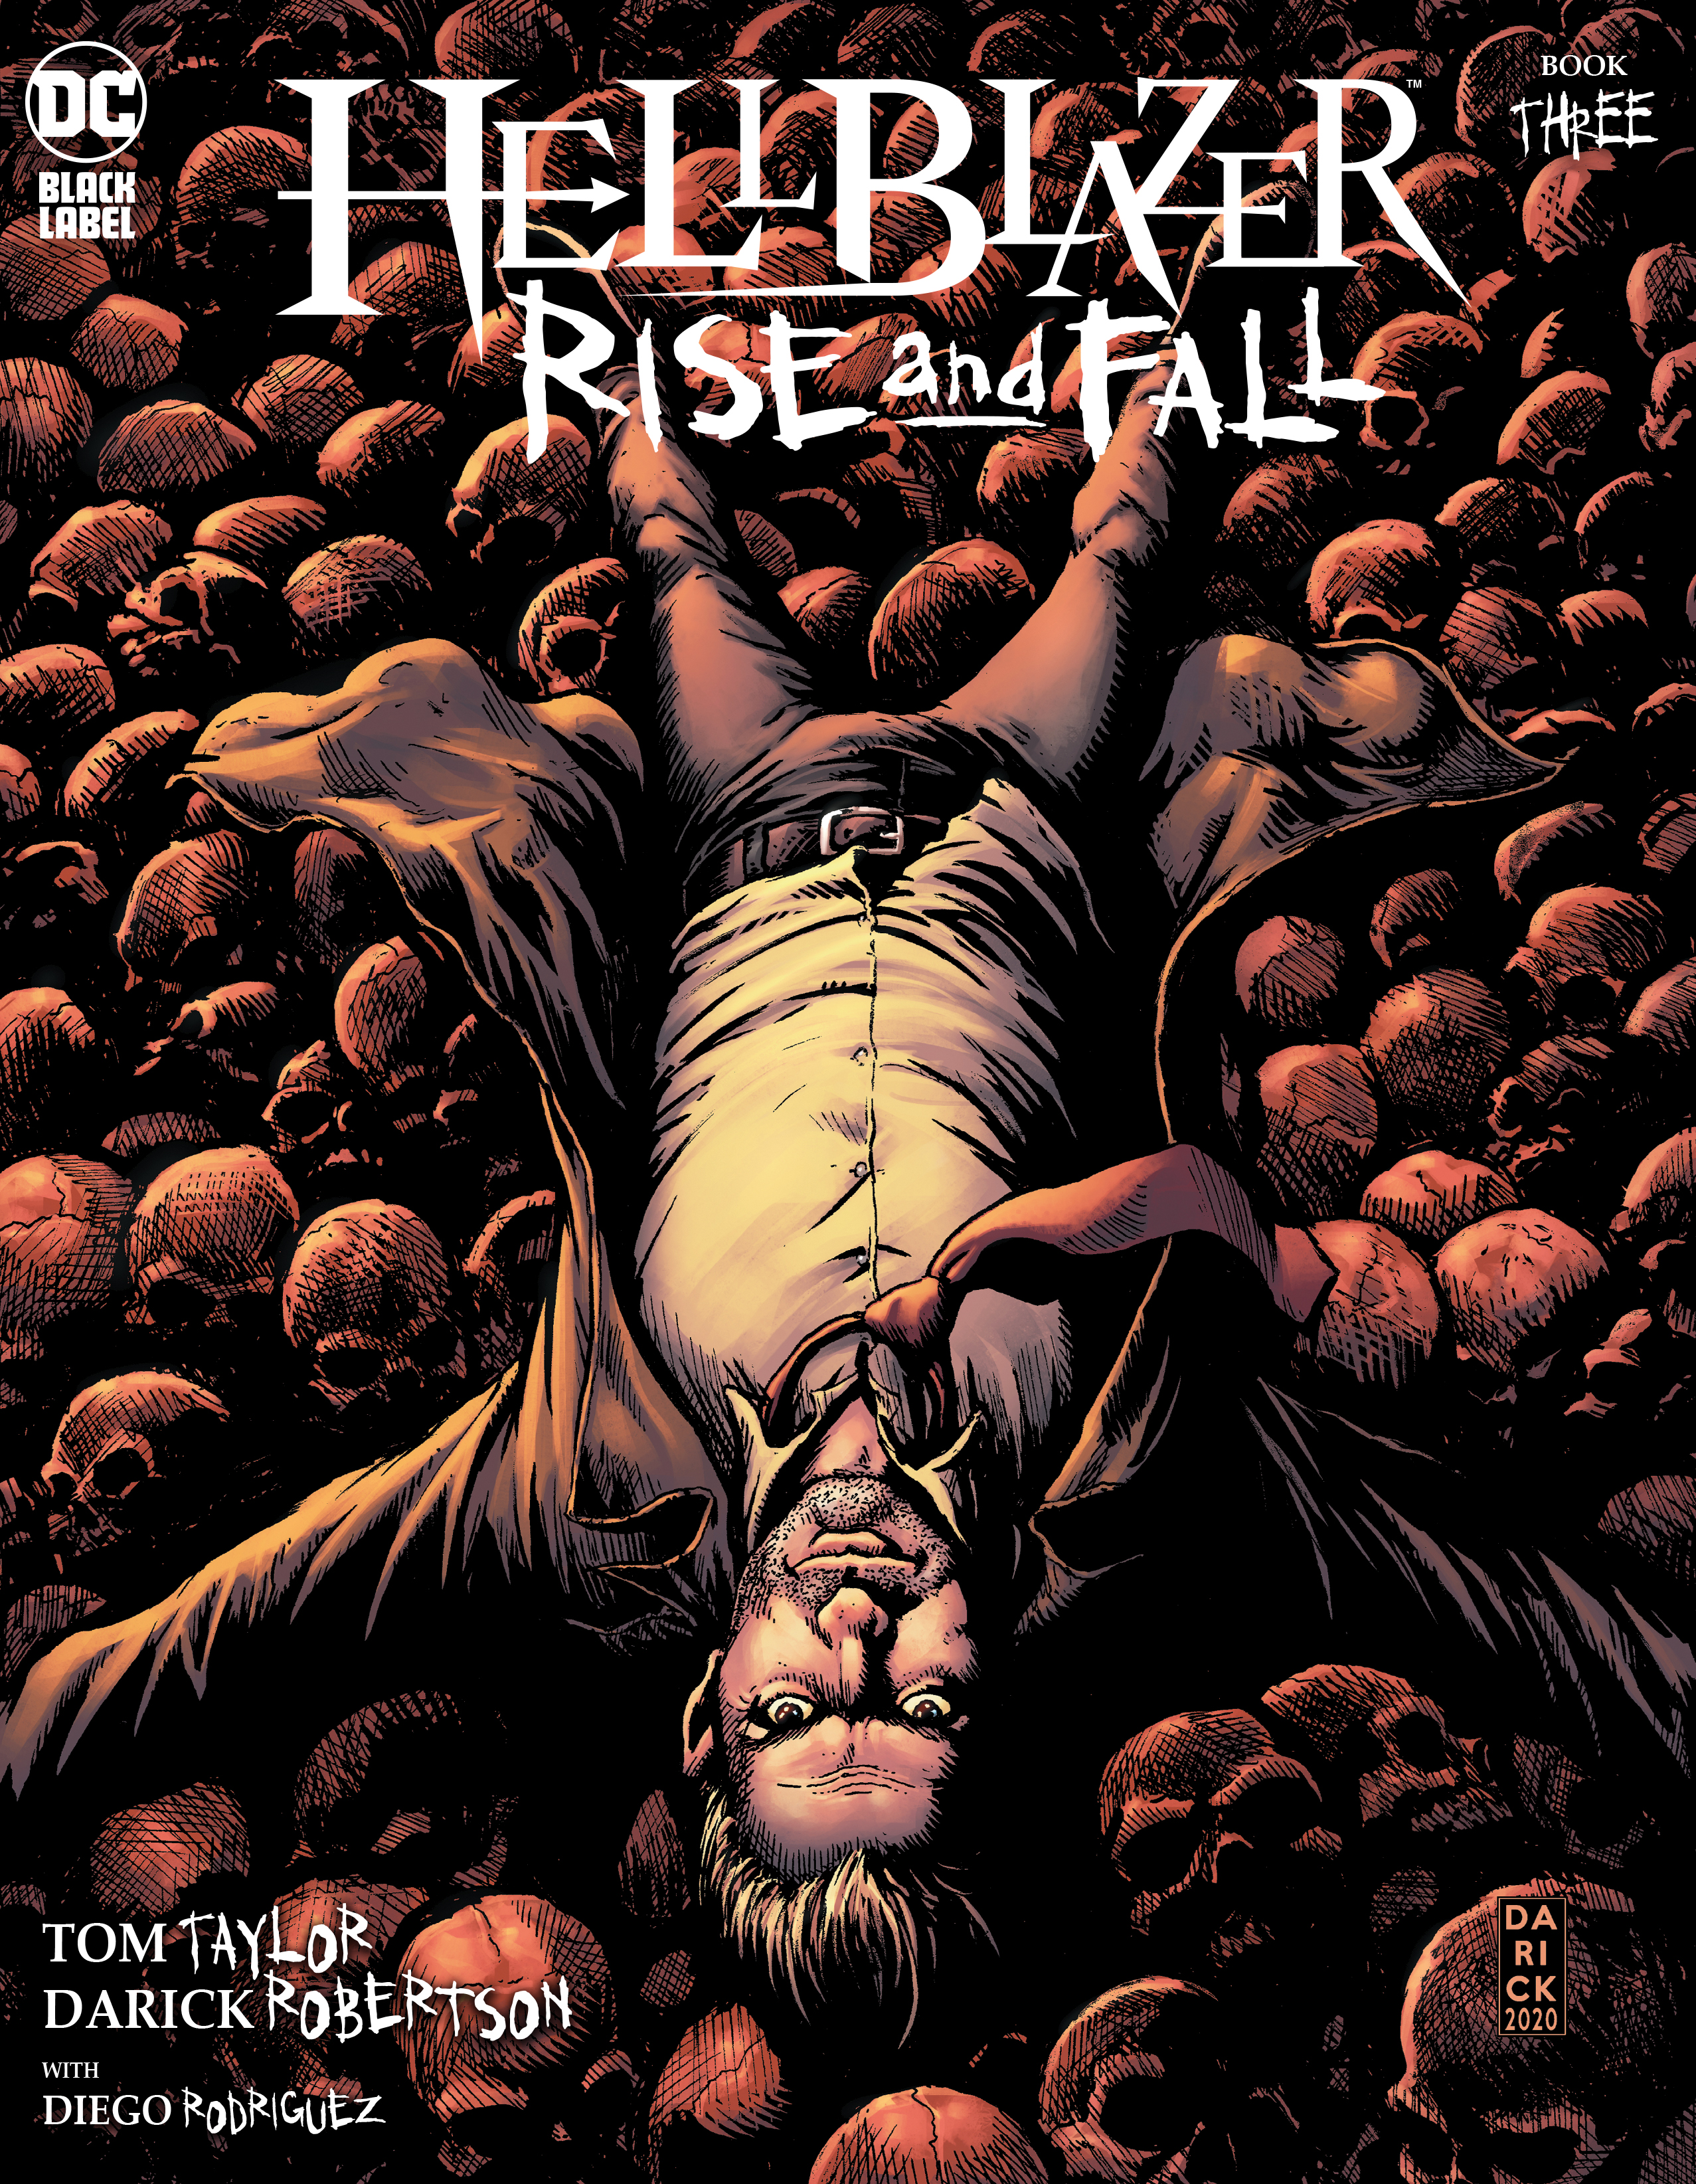 Hellblazer Rise And Fall #3 Cover A Darick Robertson (Mature) (Of 3)